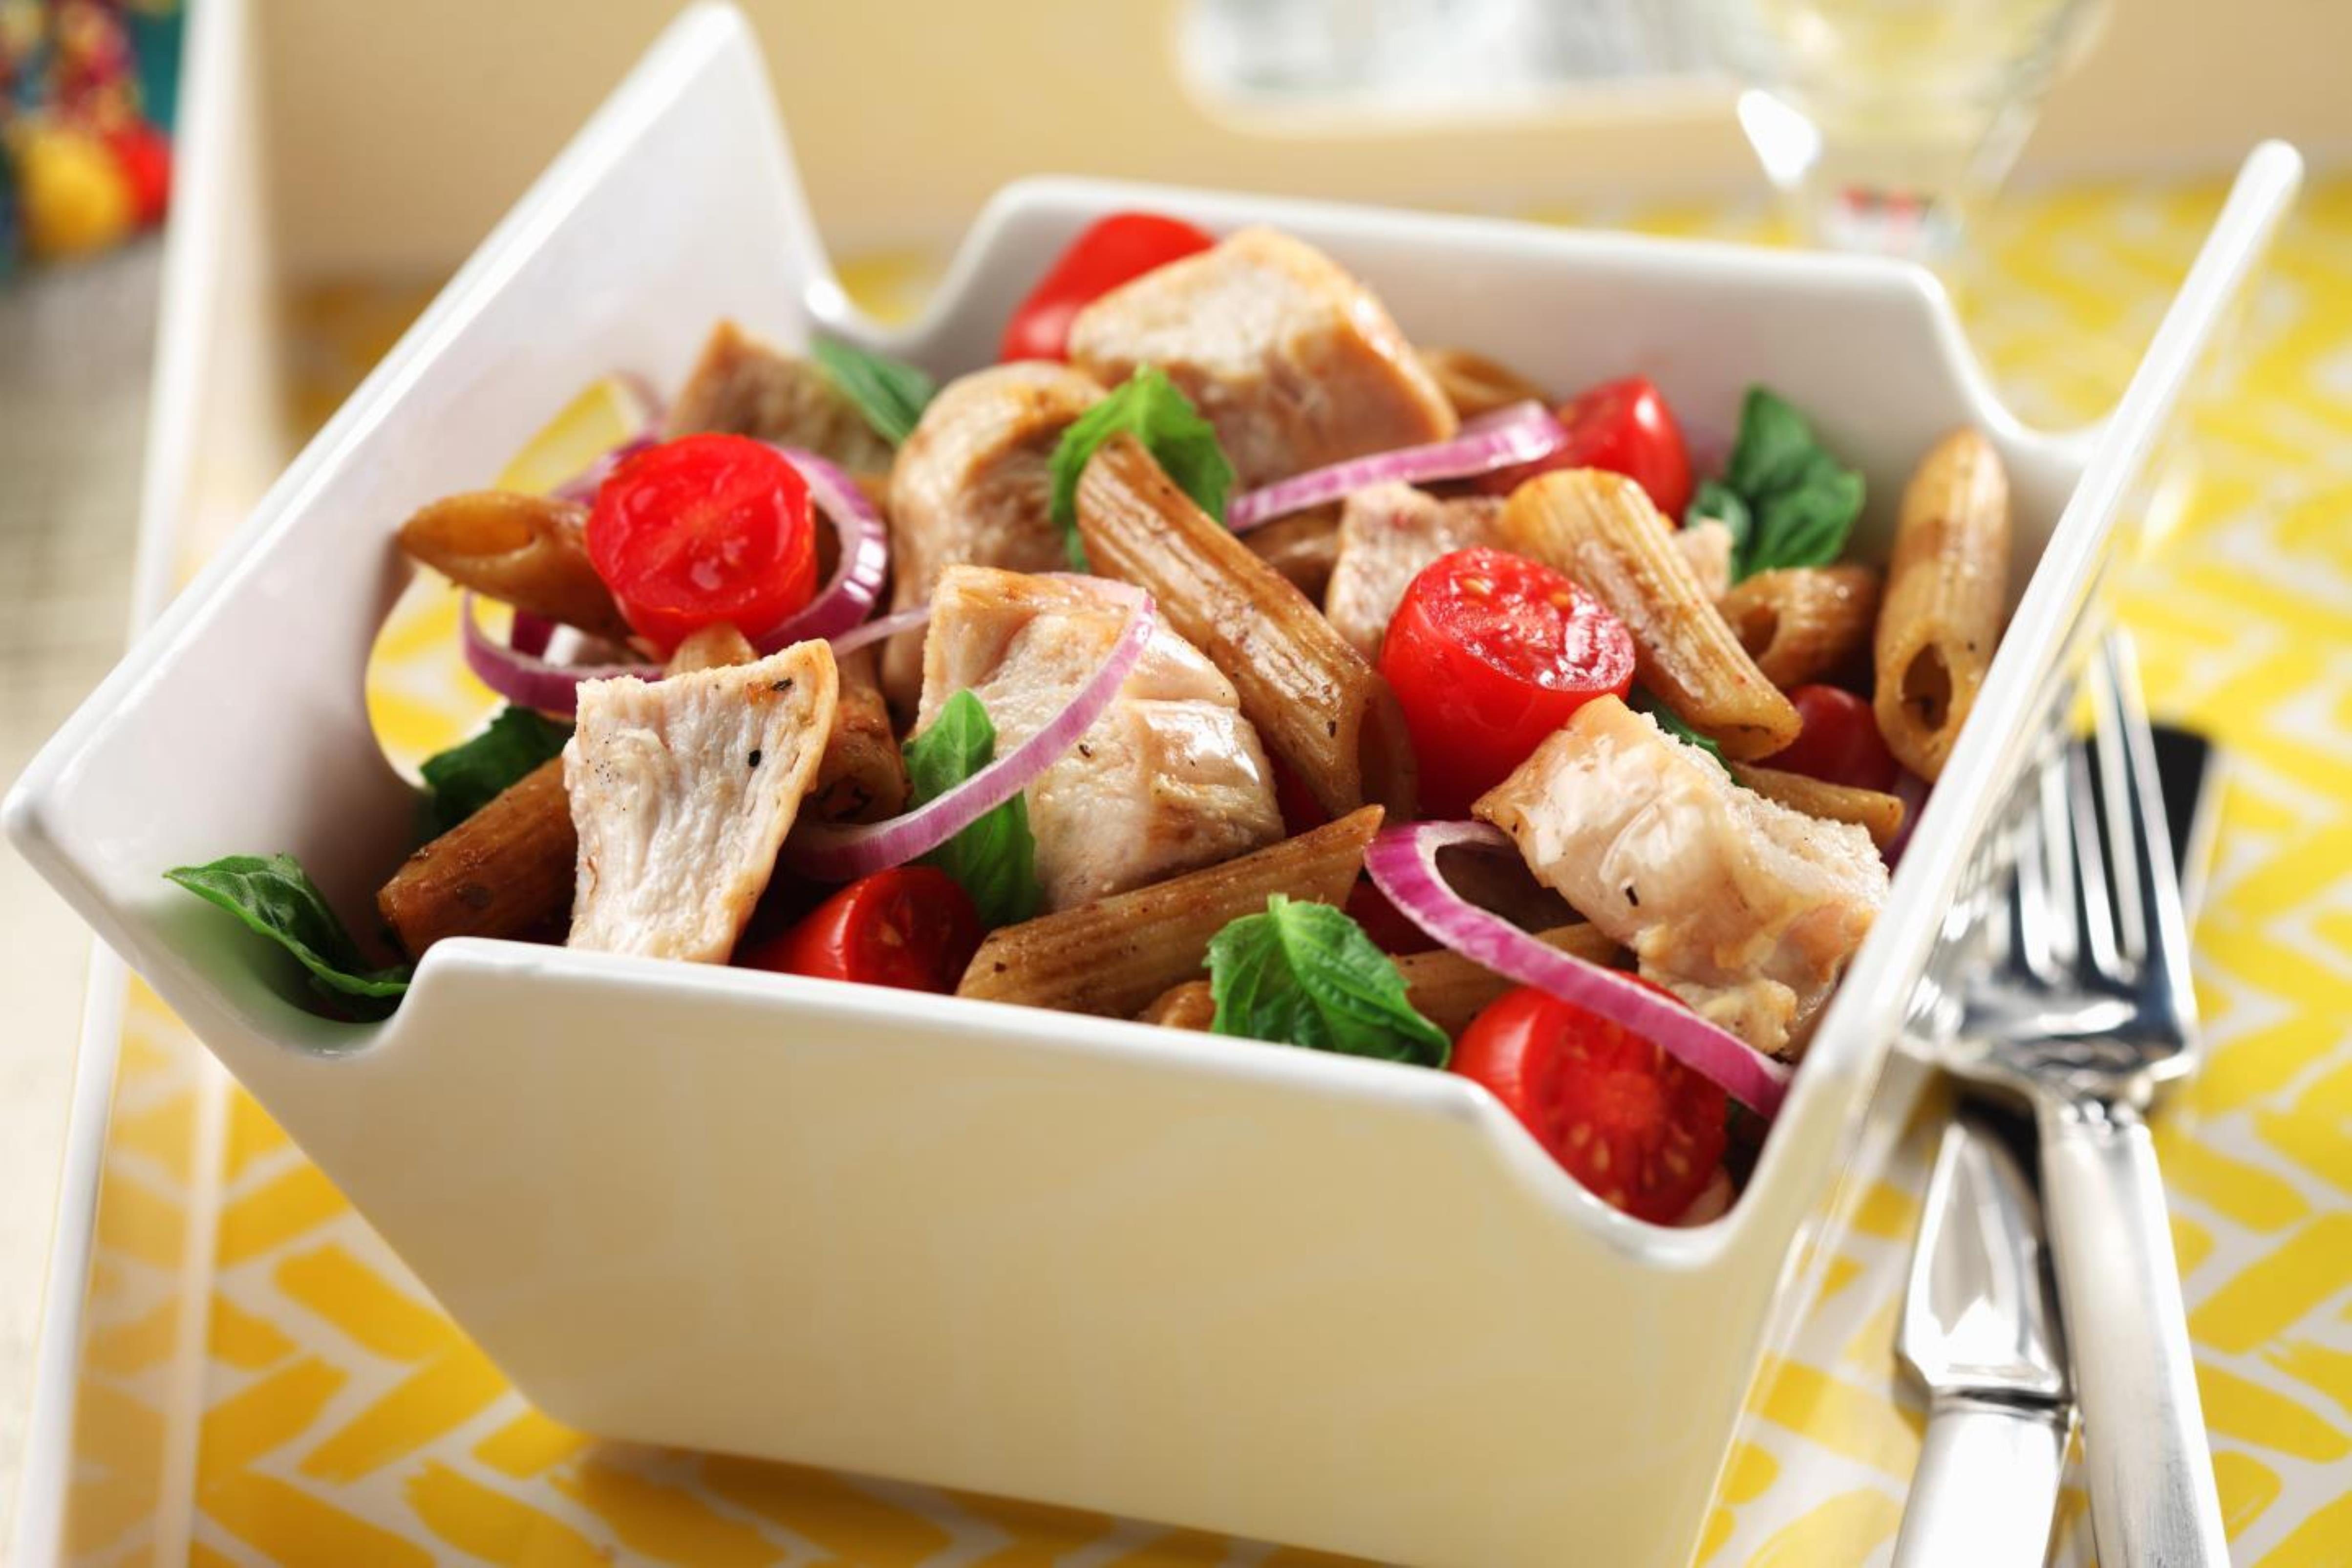 https://www.heartandstroke.ca/-/media/images/recipes/en/bistro-chicken-pasta--salad-in-a-square-white-bowl-with-a-fork-on-a-yellow-tablecloth.jpg?rev=3f630494e7da48a5a82bcad729634693&la=en&bc=f7f7f7&as=1&h=653&w=1160&hash=4704BC239C25B1F5B7CB8BE6BA9D45B7